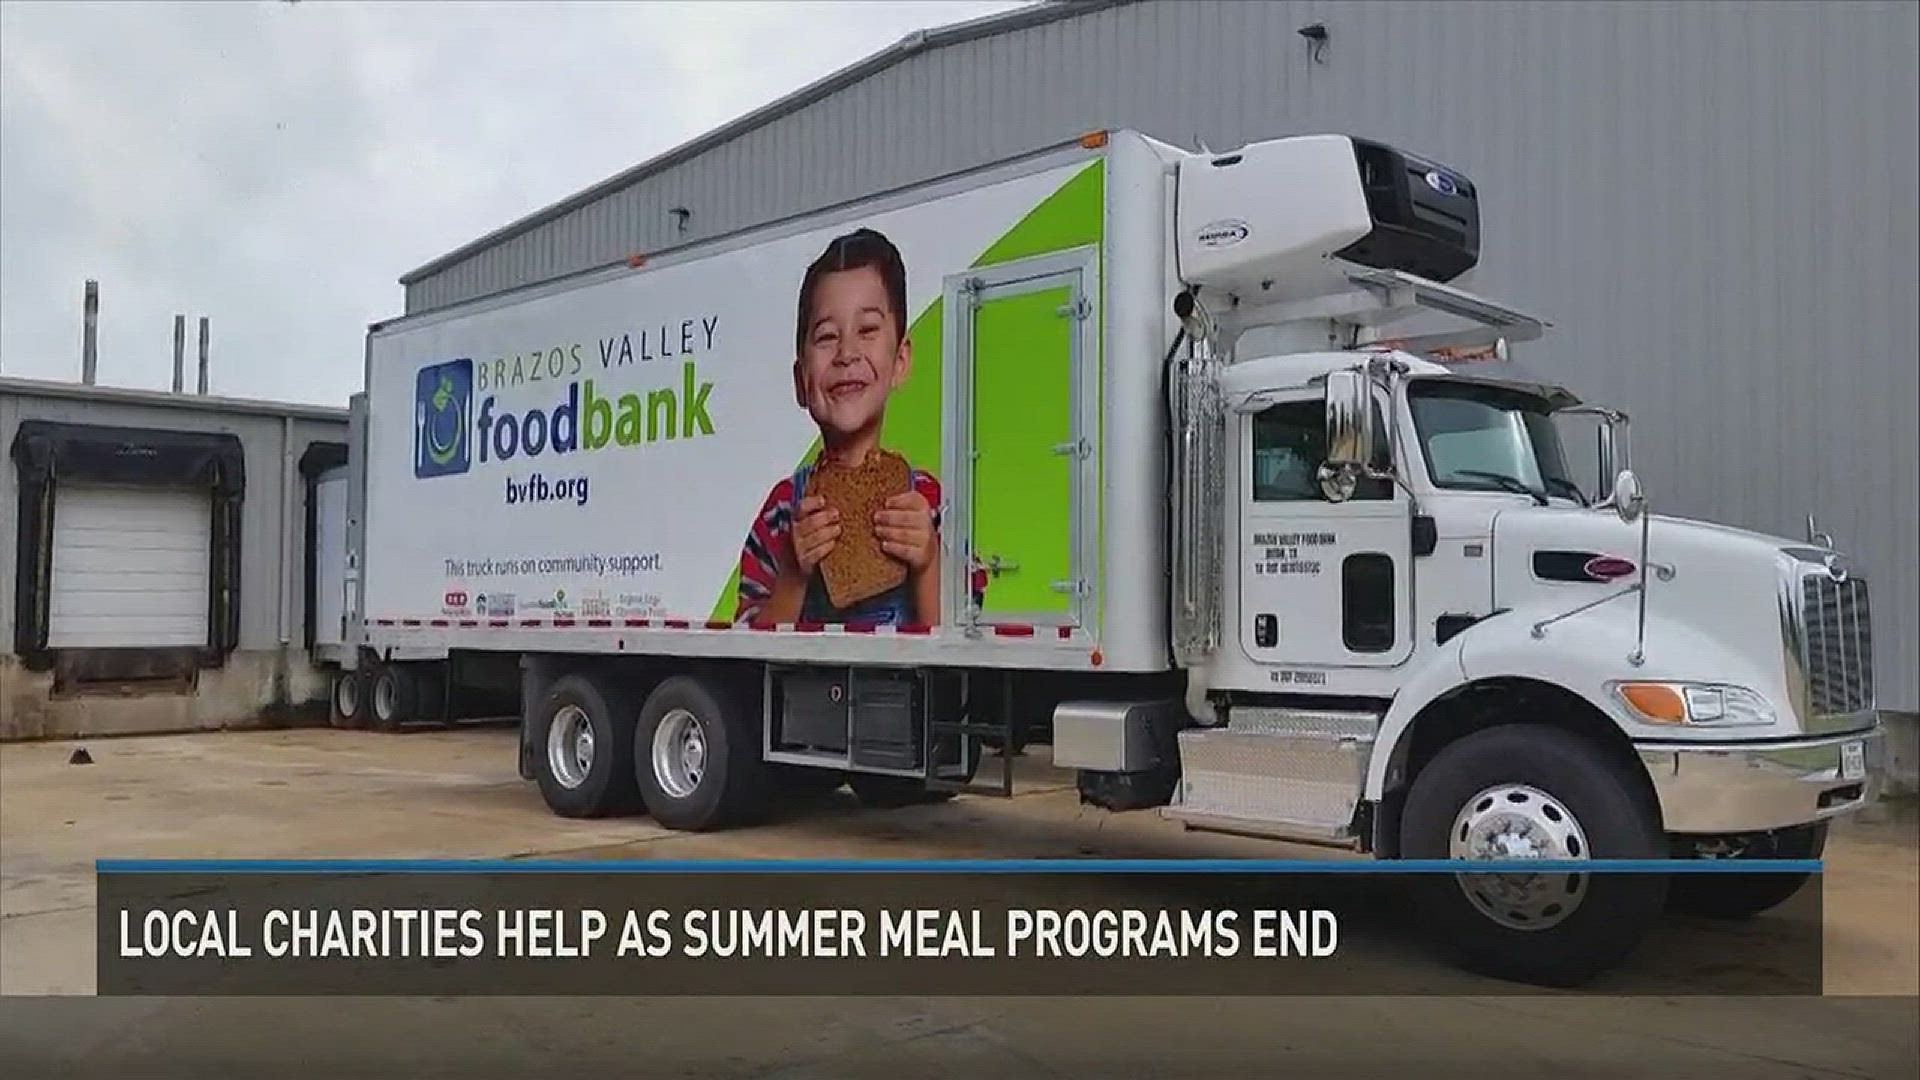 Free summer meal programs ended last week. The Brazos Valley food Bank  and local charities are helping fill the gap the next three weeks.